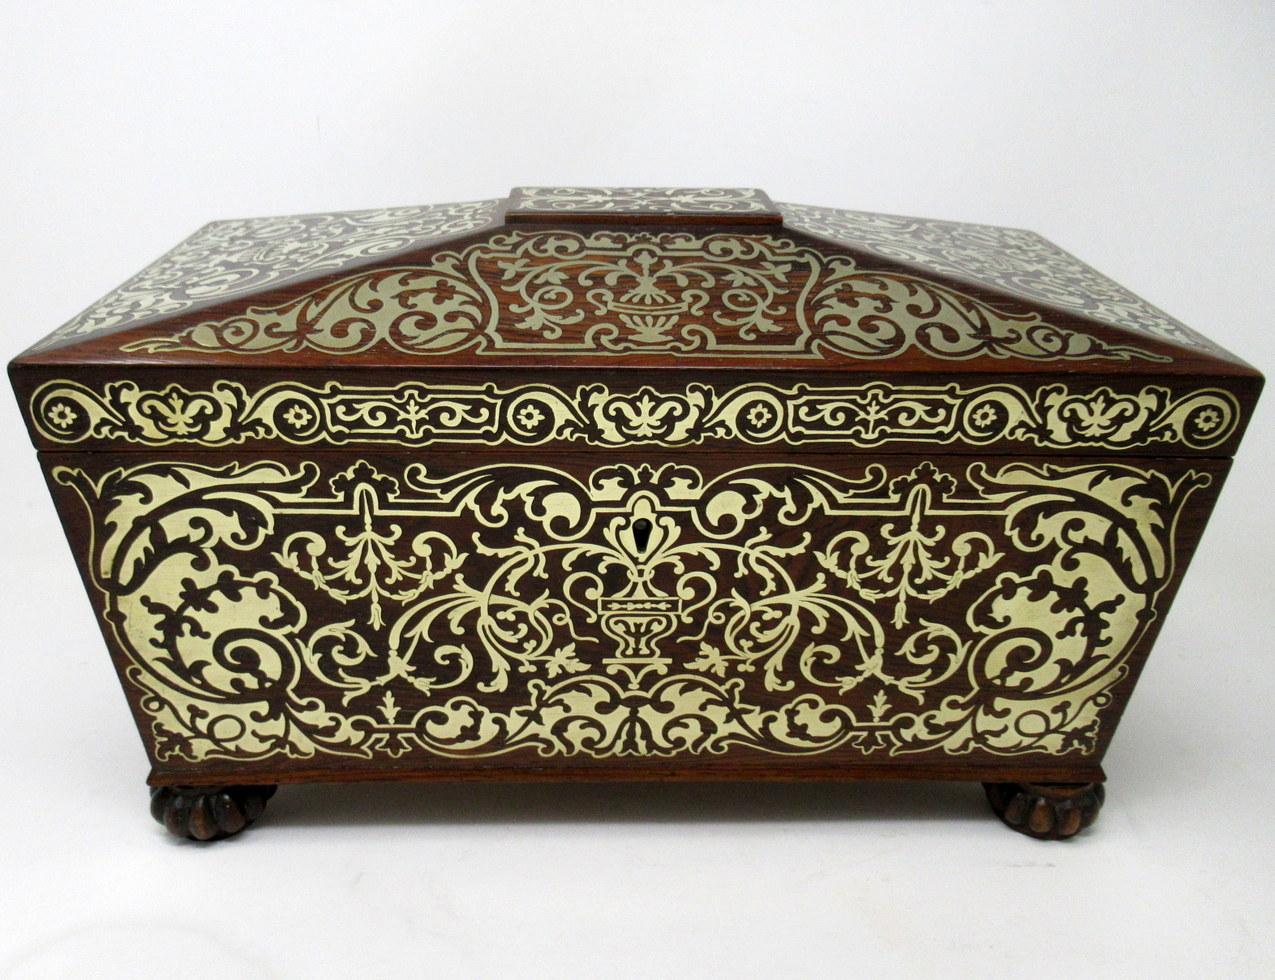 Polished Antique Brass Inlaid Mahogany English Tea Caddy Box Regency Gillows Lancaster For Sale